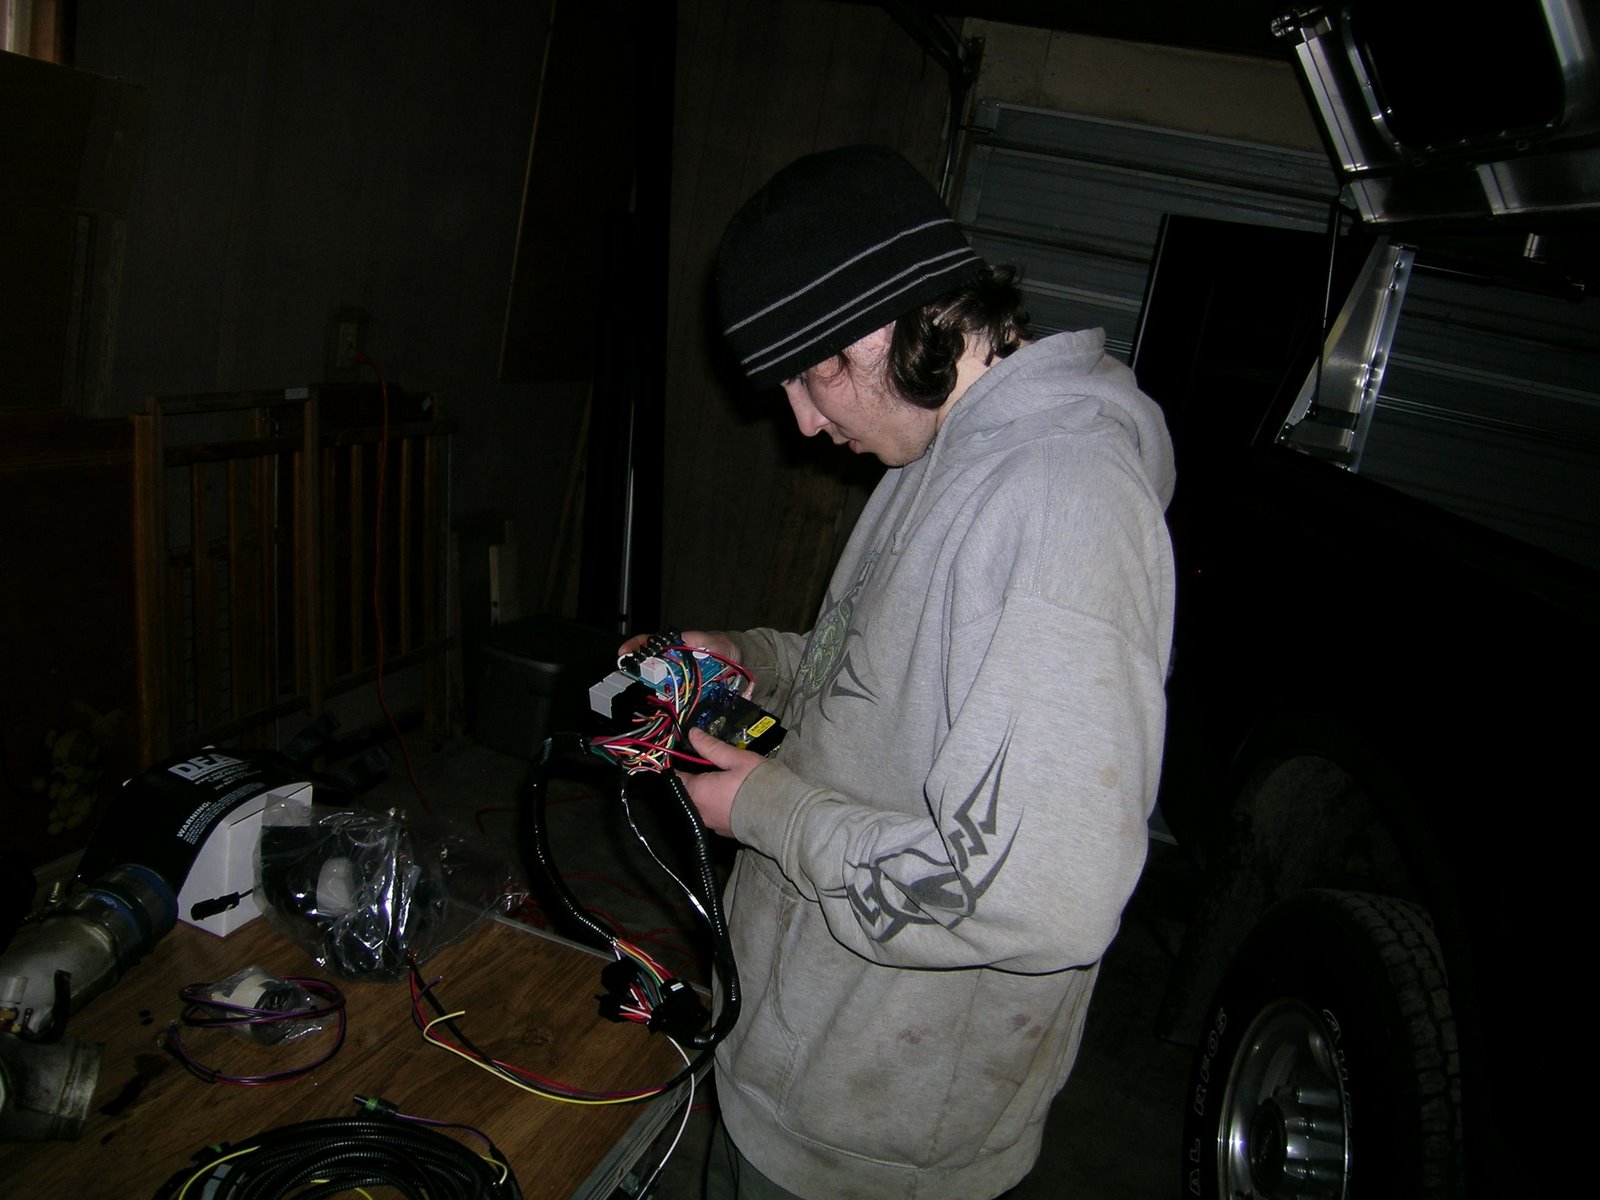 [Brandon+with+wires+.jpg]